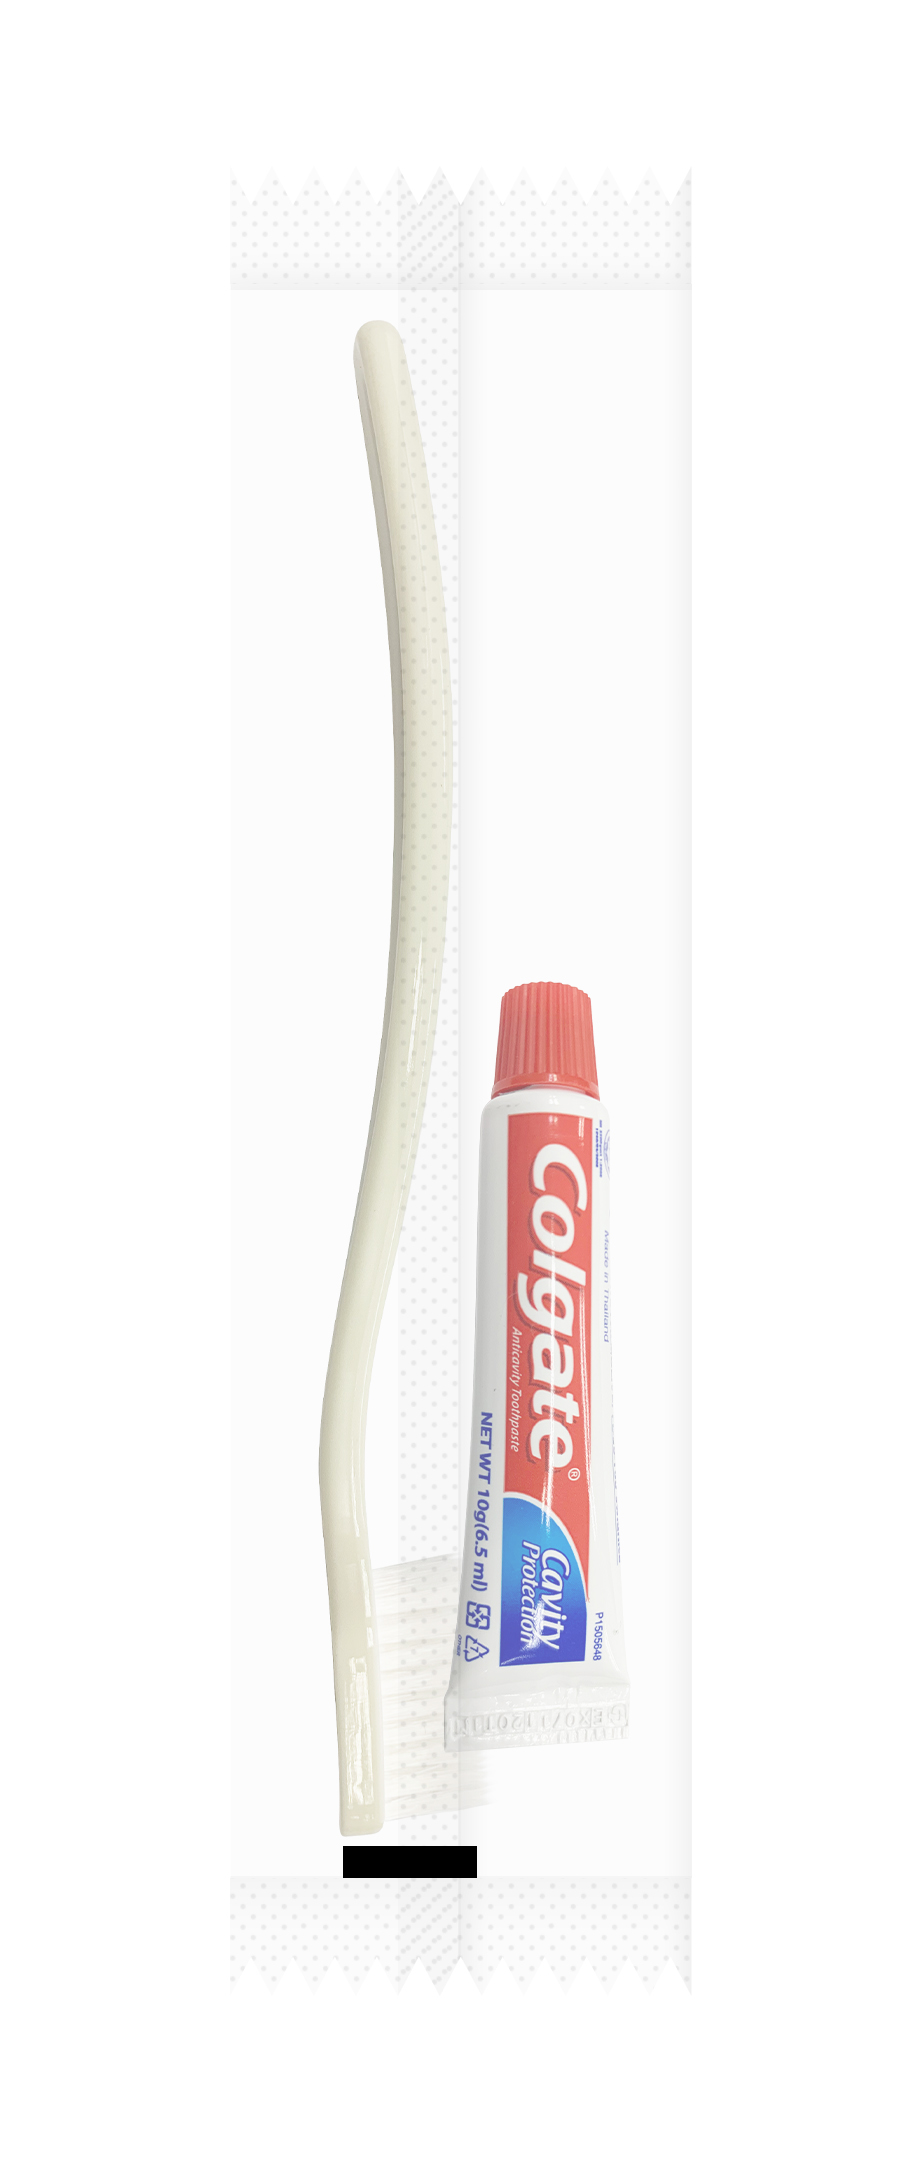 Tooth Brush and Tube Photo